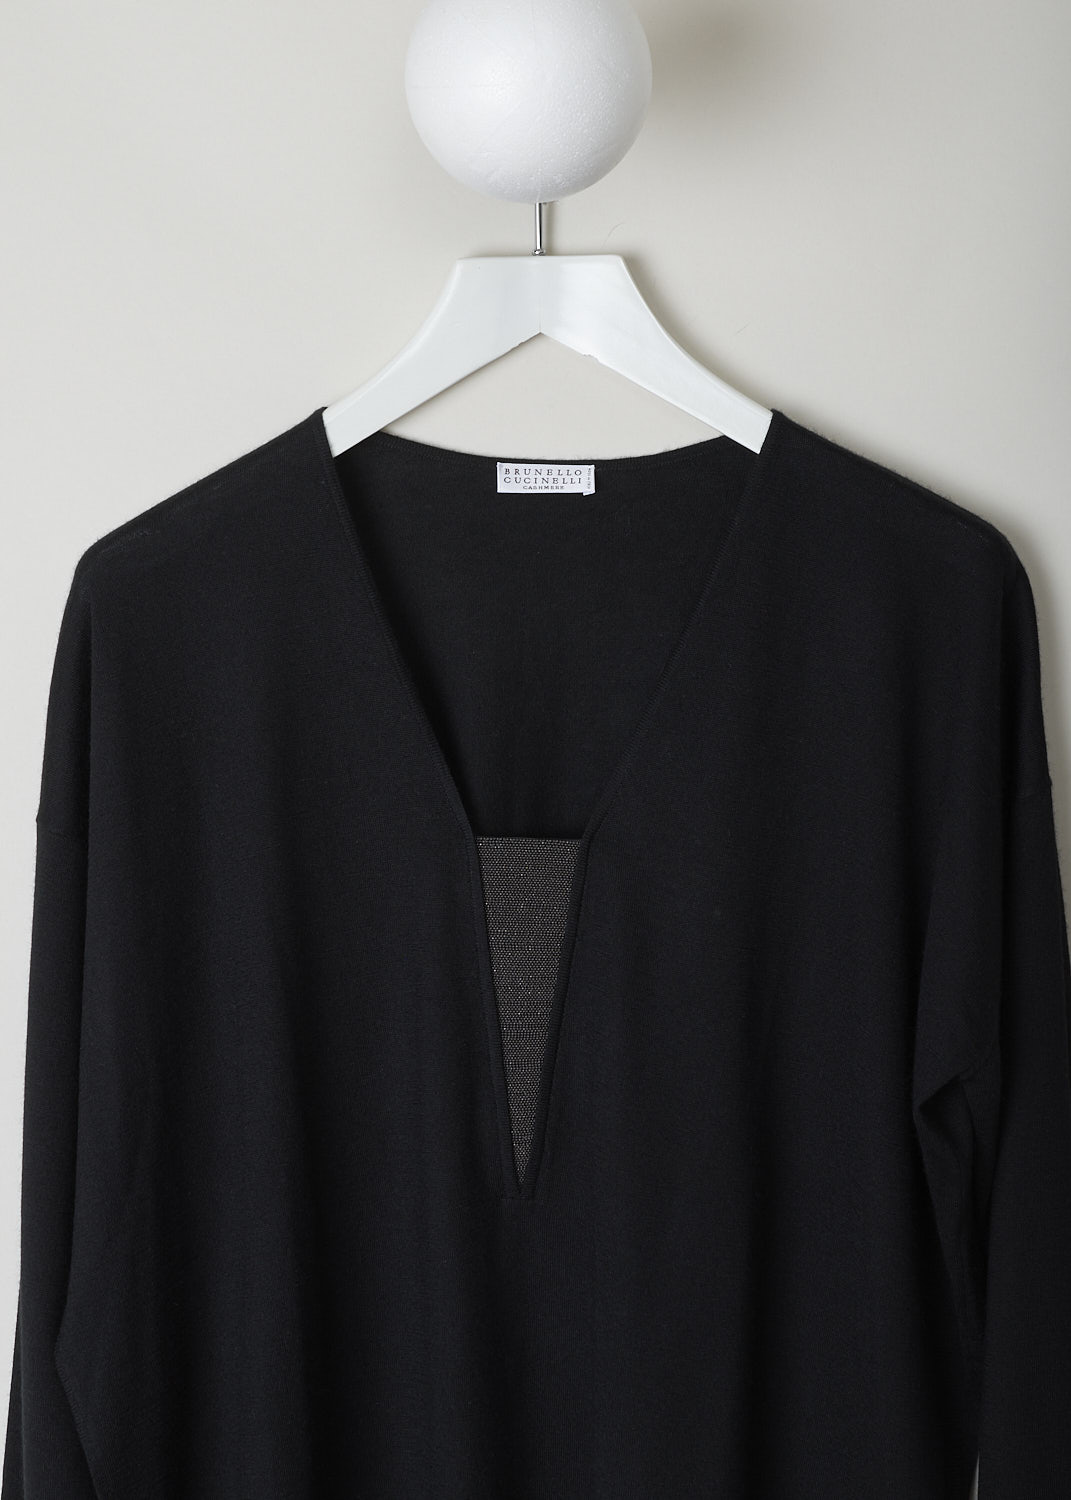 BRUNELLO CUCINELLI, LONG SLEEVE BEADED V-NECK TOP, M13865802_C101, Black, Detail, This black long sleeve top is made with a lightweight cashmere blend. The top has a V-neckline that is decorated with the brand's signature monili beads. The cuffs and the hemline have a ribbed finish. 
